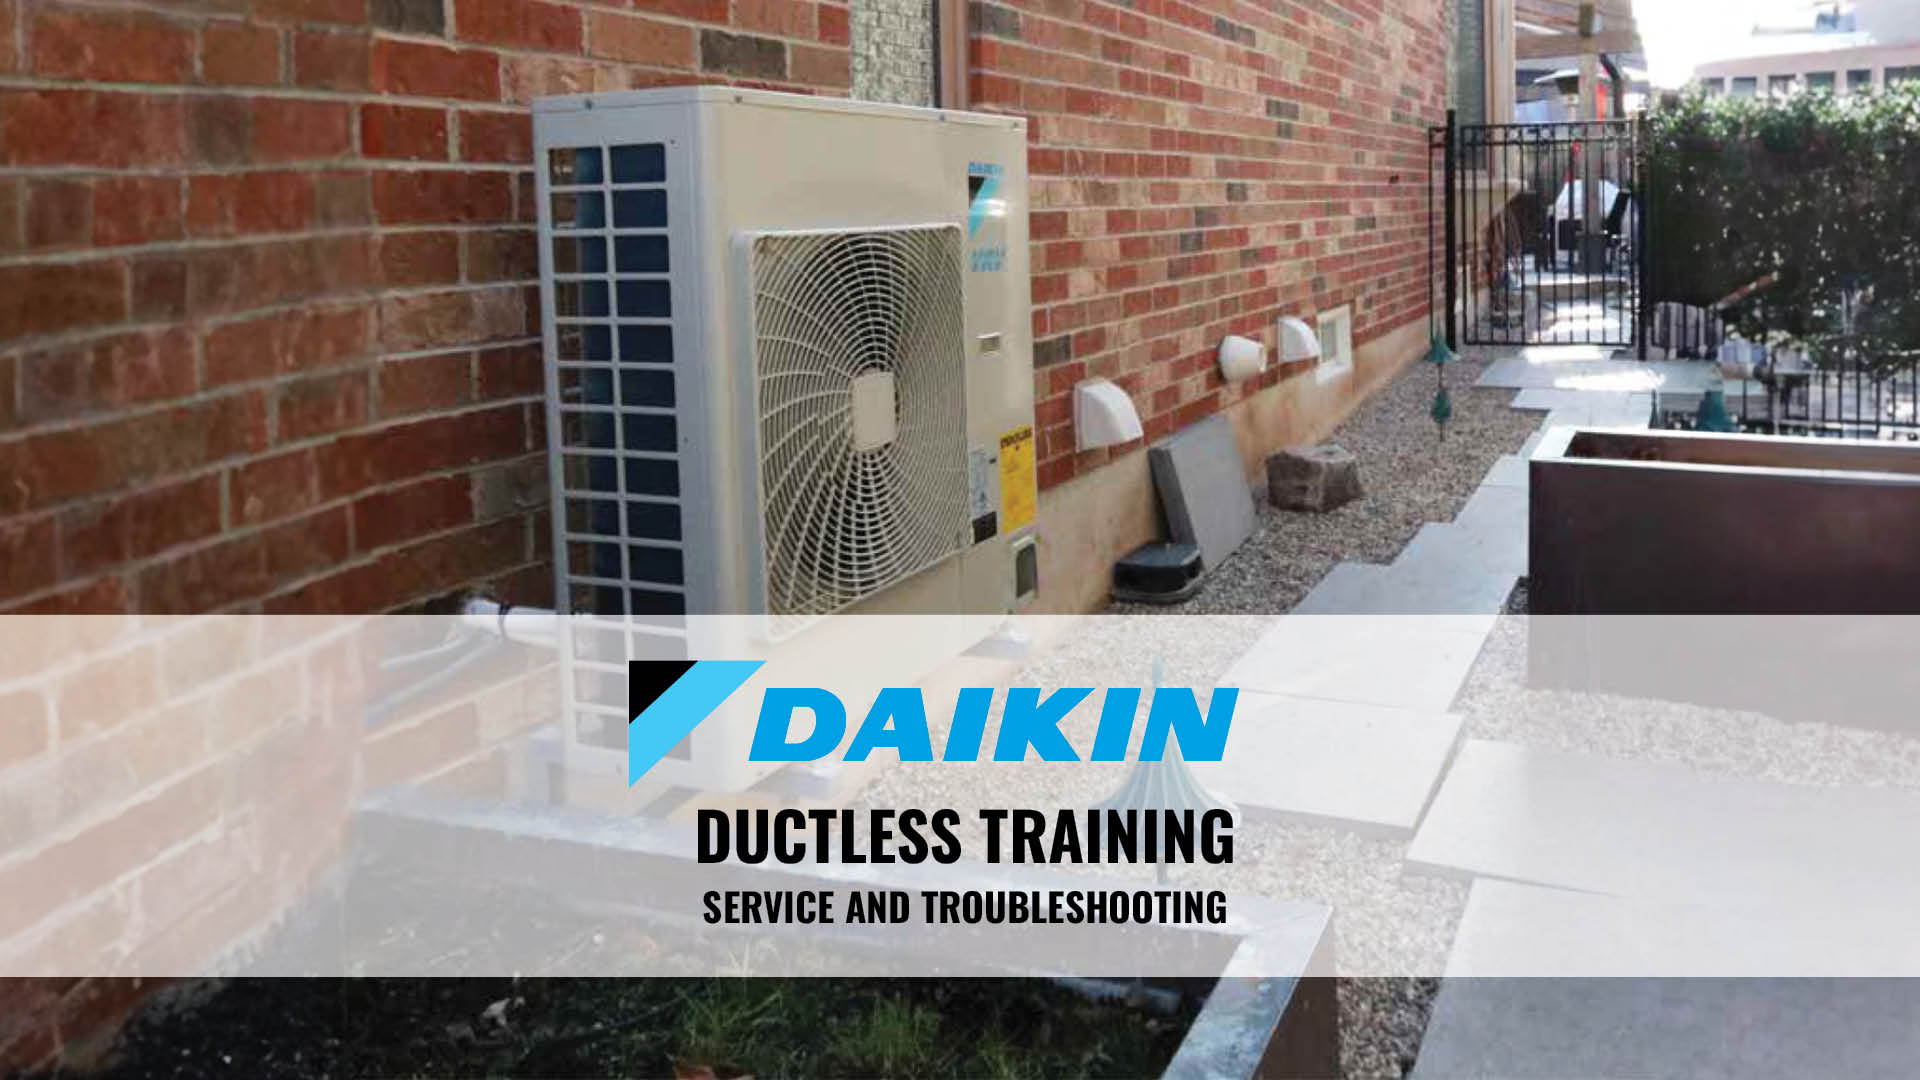 Daikin Ductless Training: Service and Troubleshooting in South Burnaby